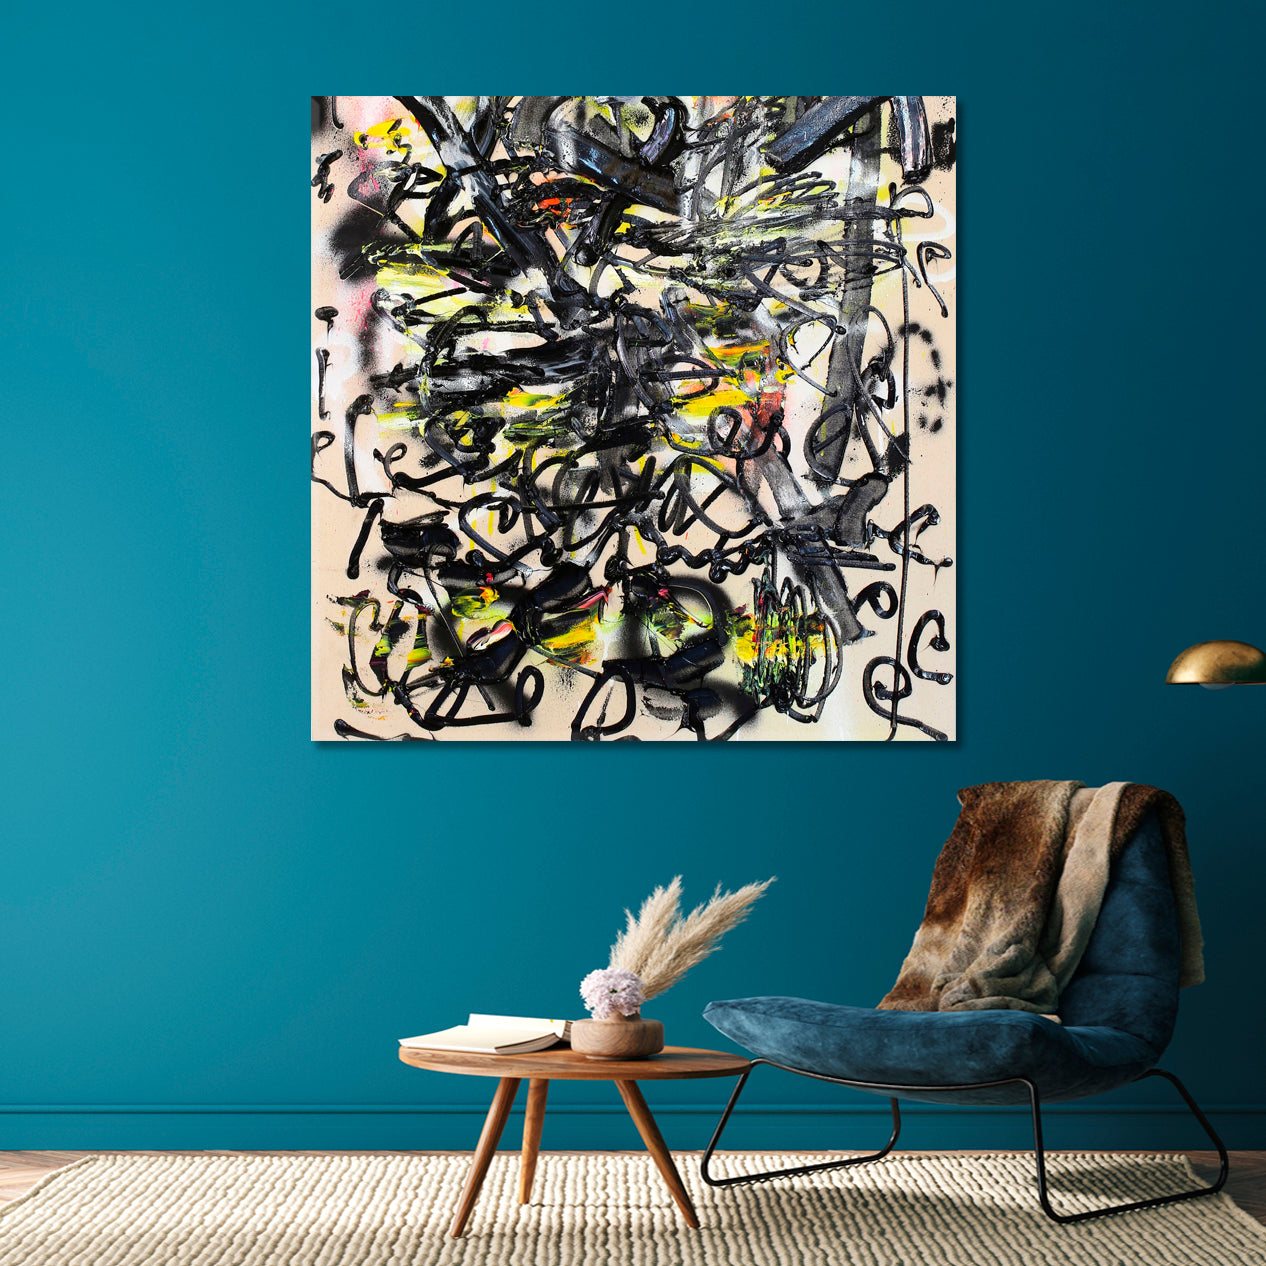 ART OF INNER SELF Action Painting Abstract Expressionism Abstract Art Print Artesty 1 Panel 12"x12" 